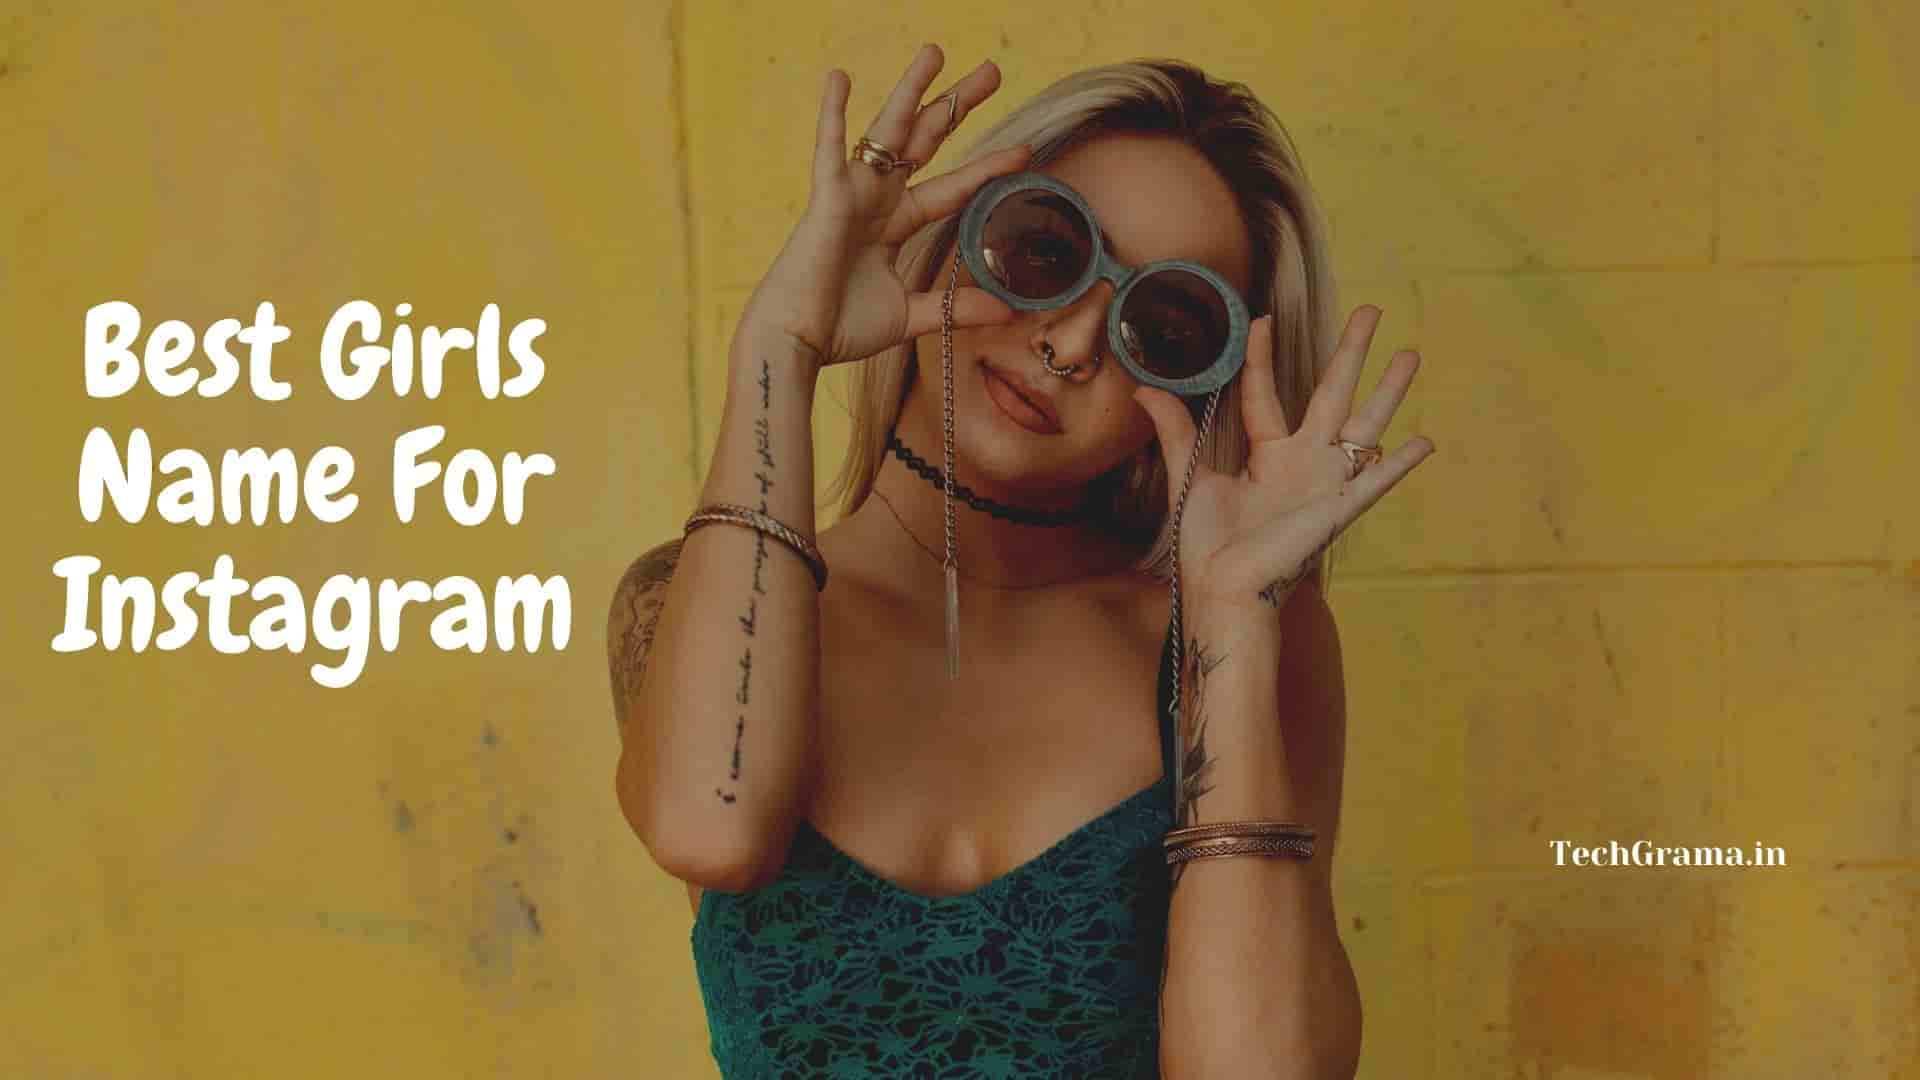 Best Instagram Names To Get Followers For Girls, What Are Good Instagram Names For a Girl, Whats a Good Nickname For a Girl, Good Instagram Usernames For Girls, Best Instagram Names For Girl Indian, Good Instagram Names For Girls, Best Insta ID Name For Girl